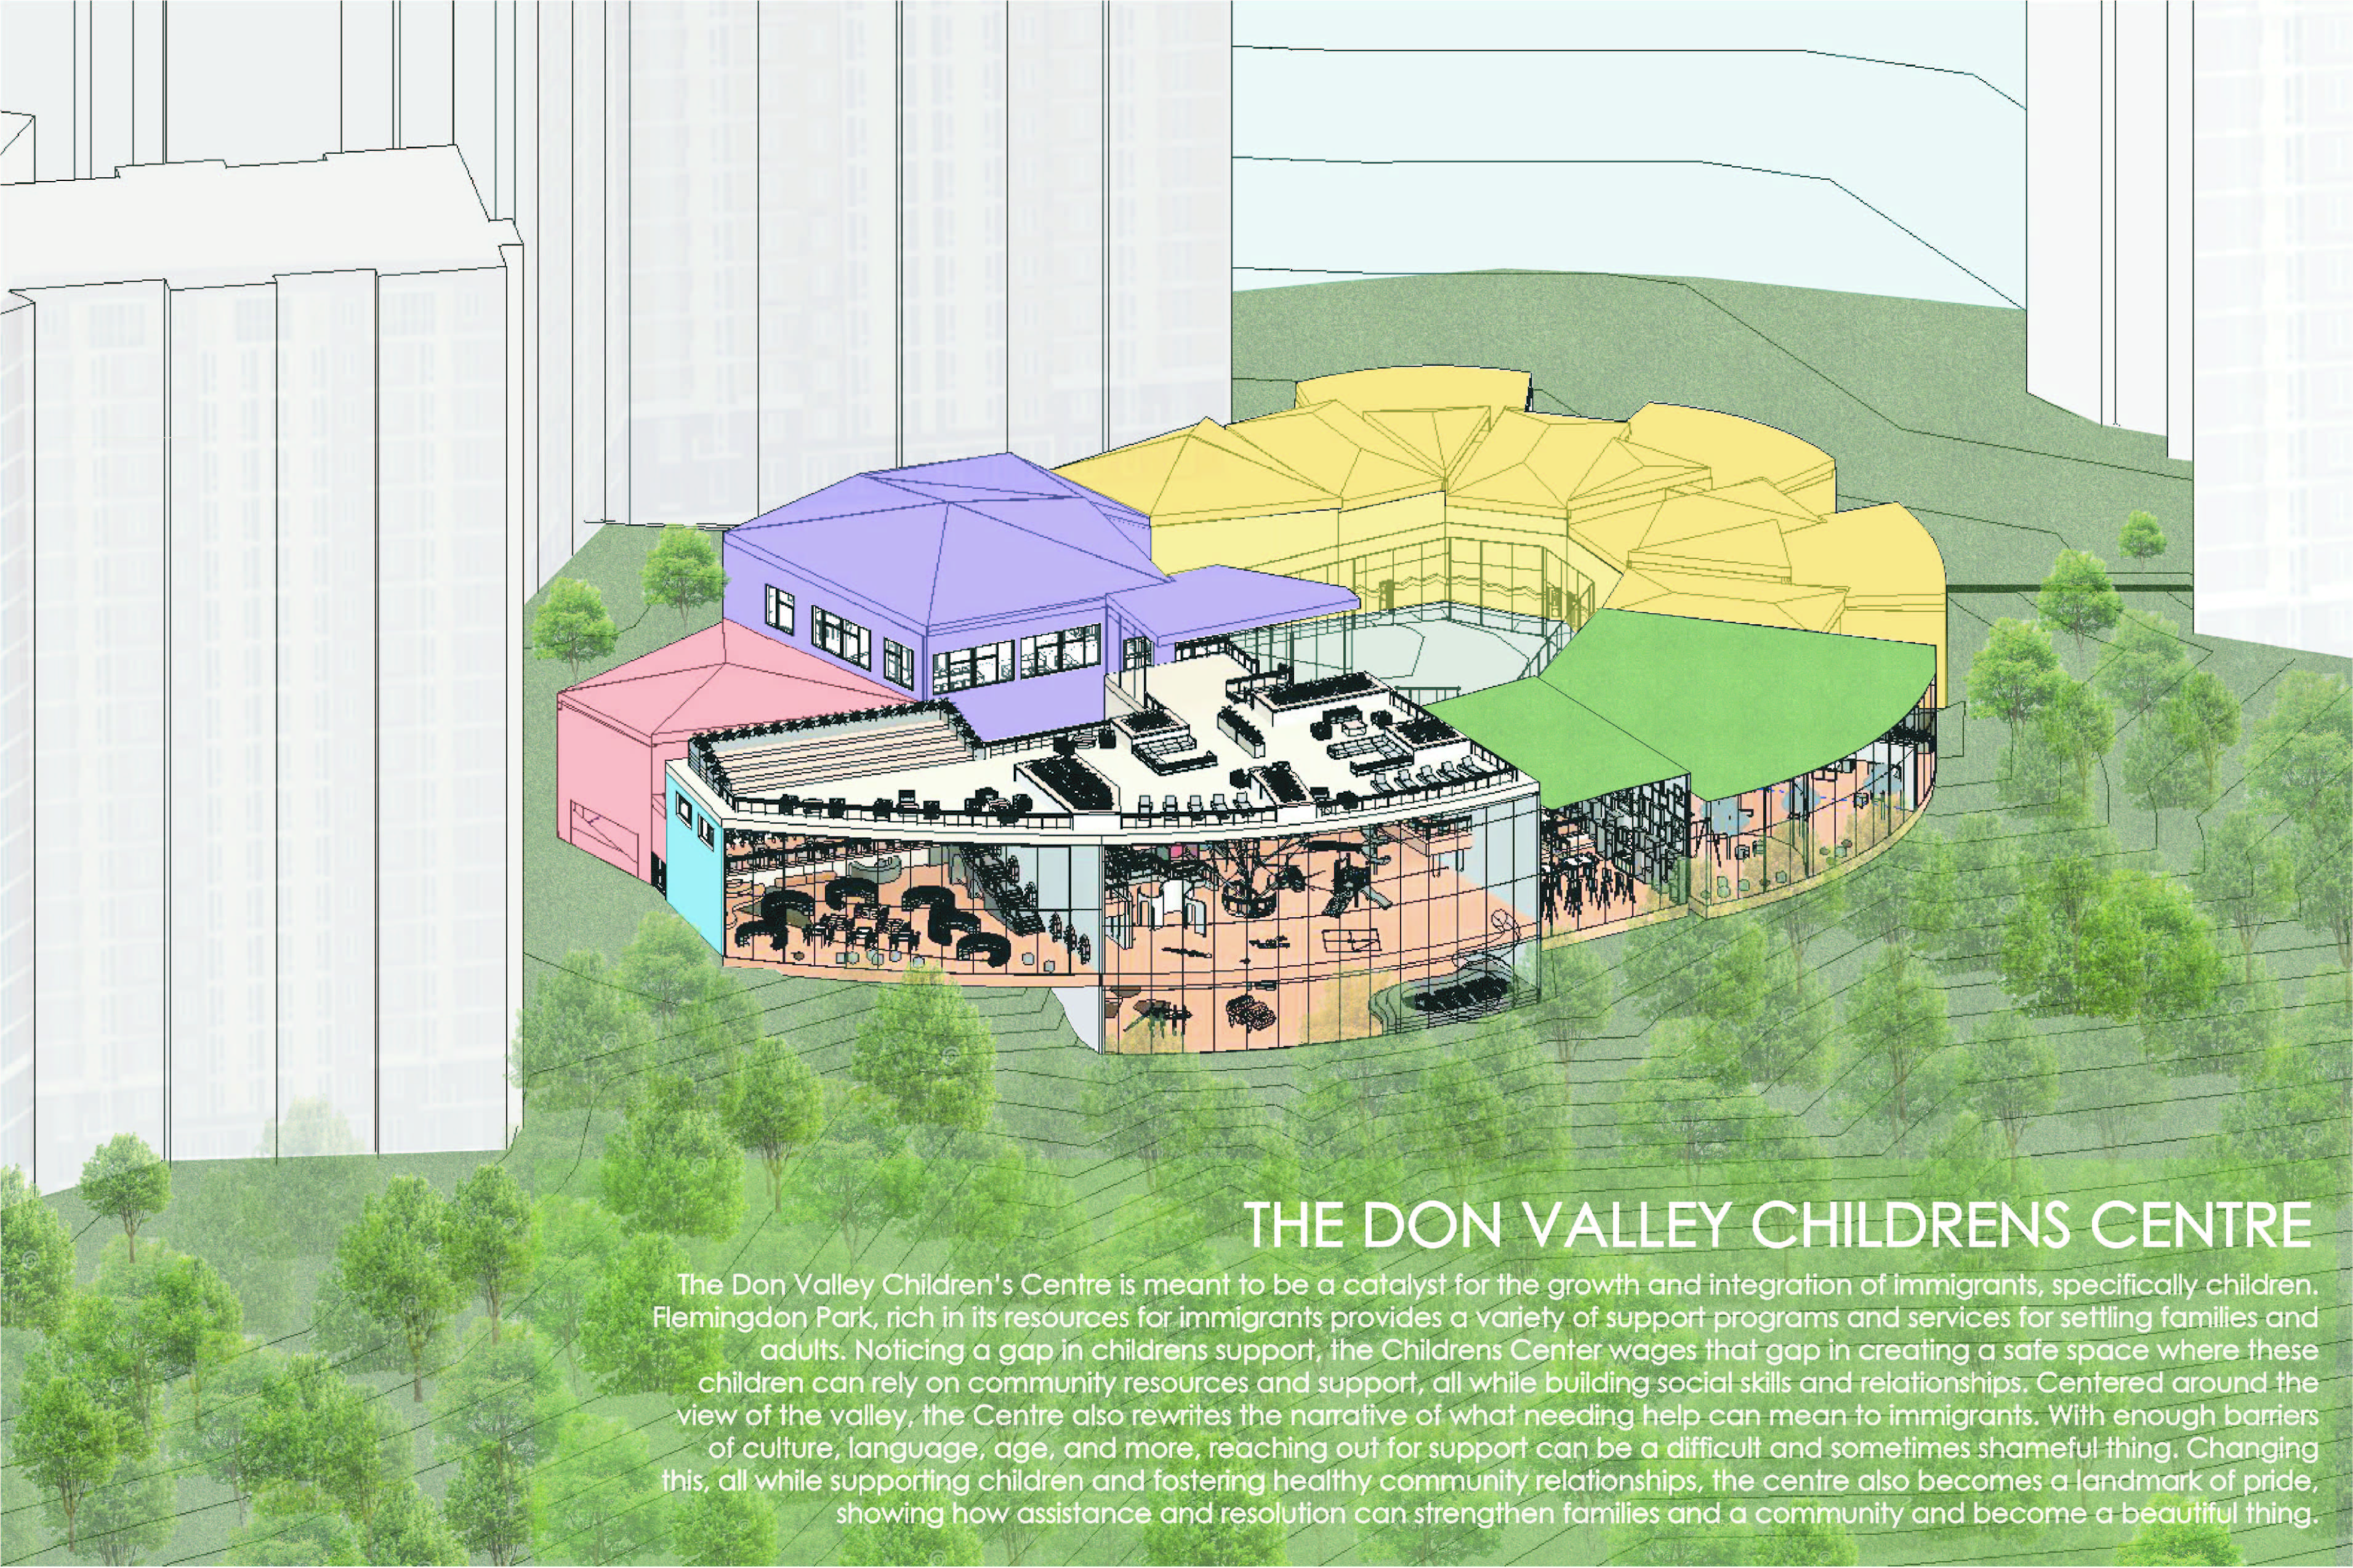 The Don Valley Children's Centre